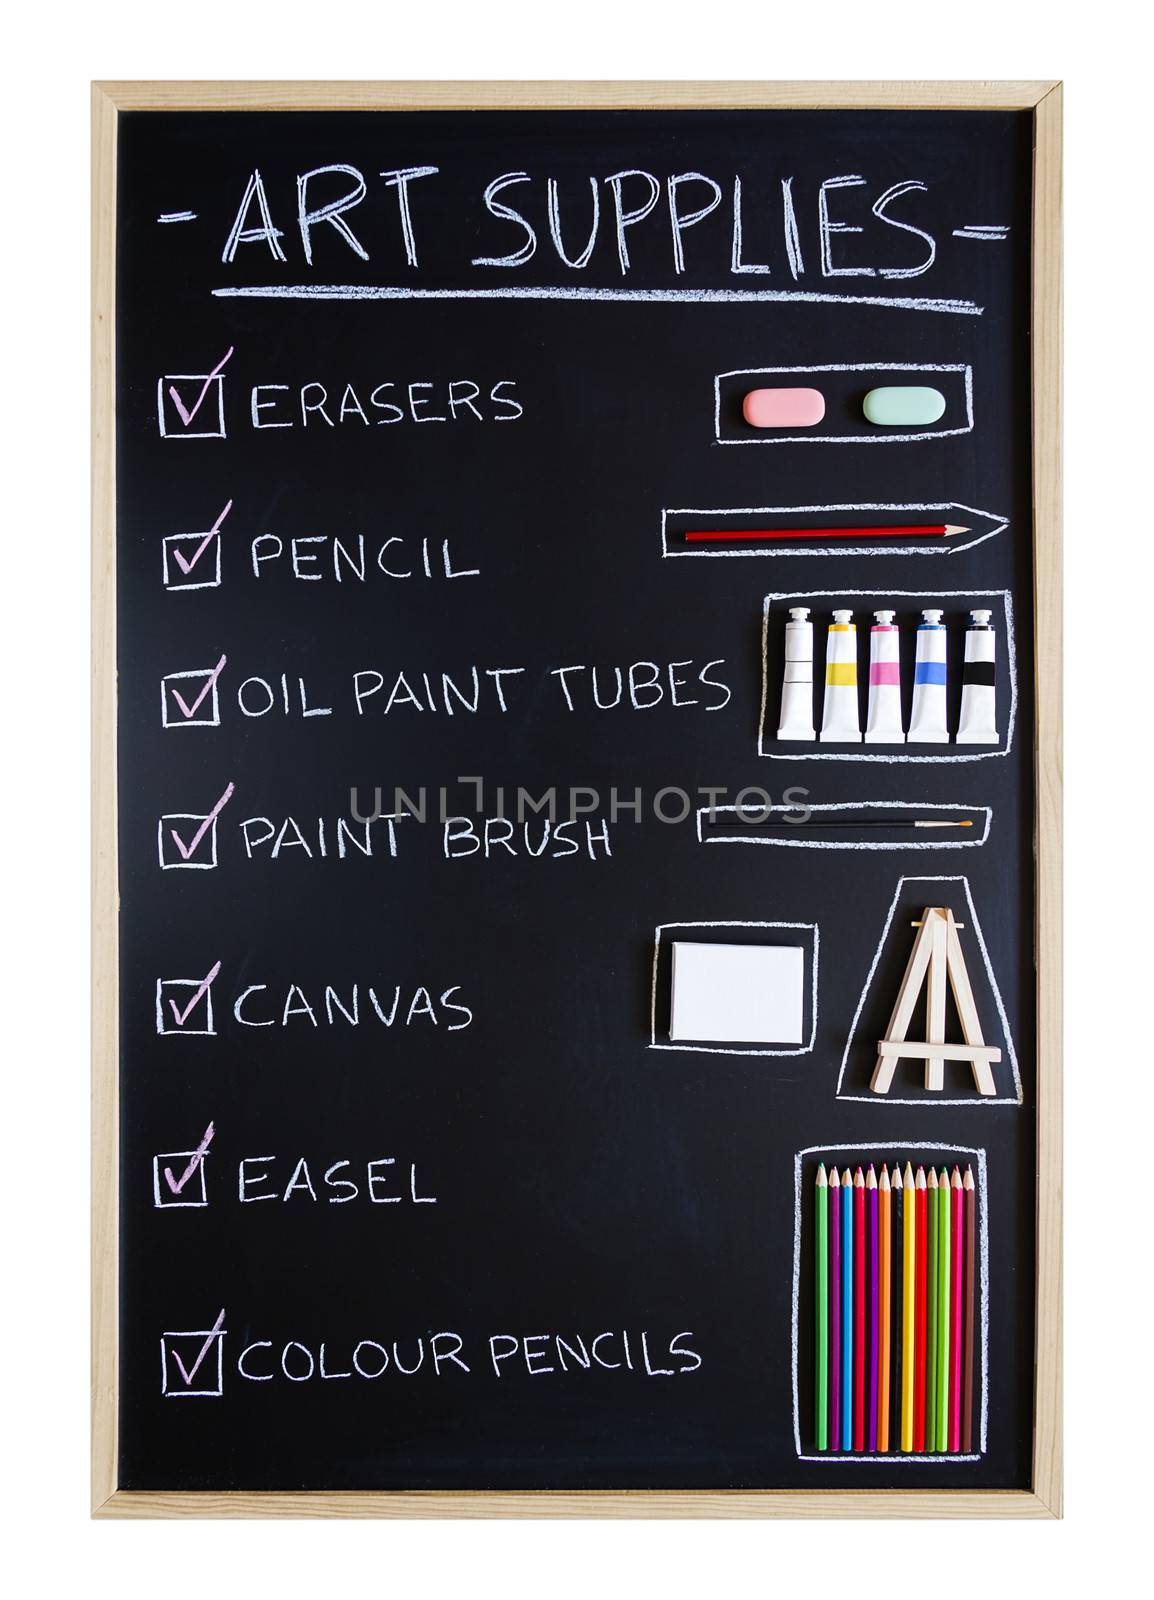 Art supplies over blackboard background by doble.d